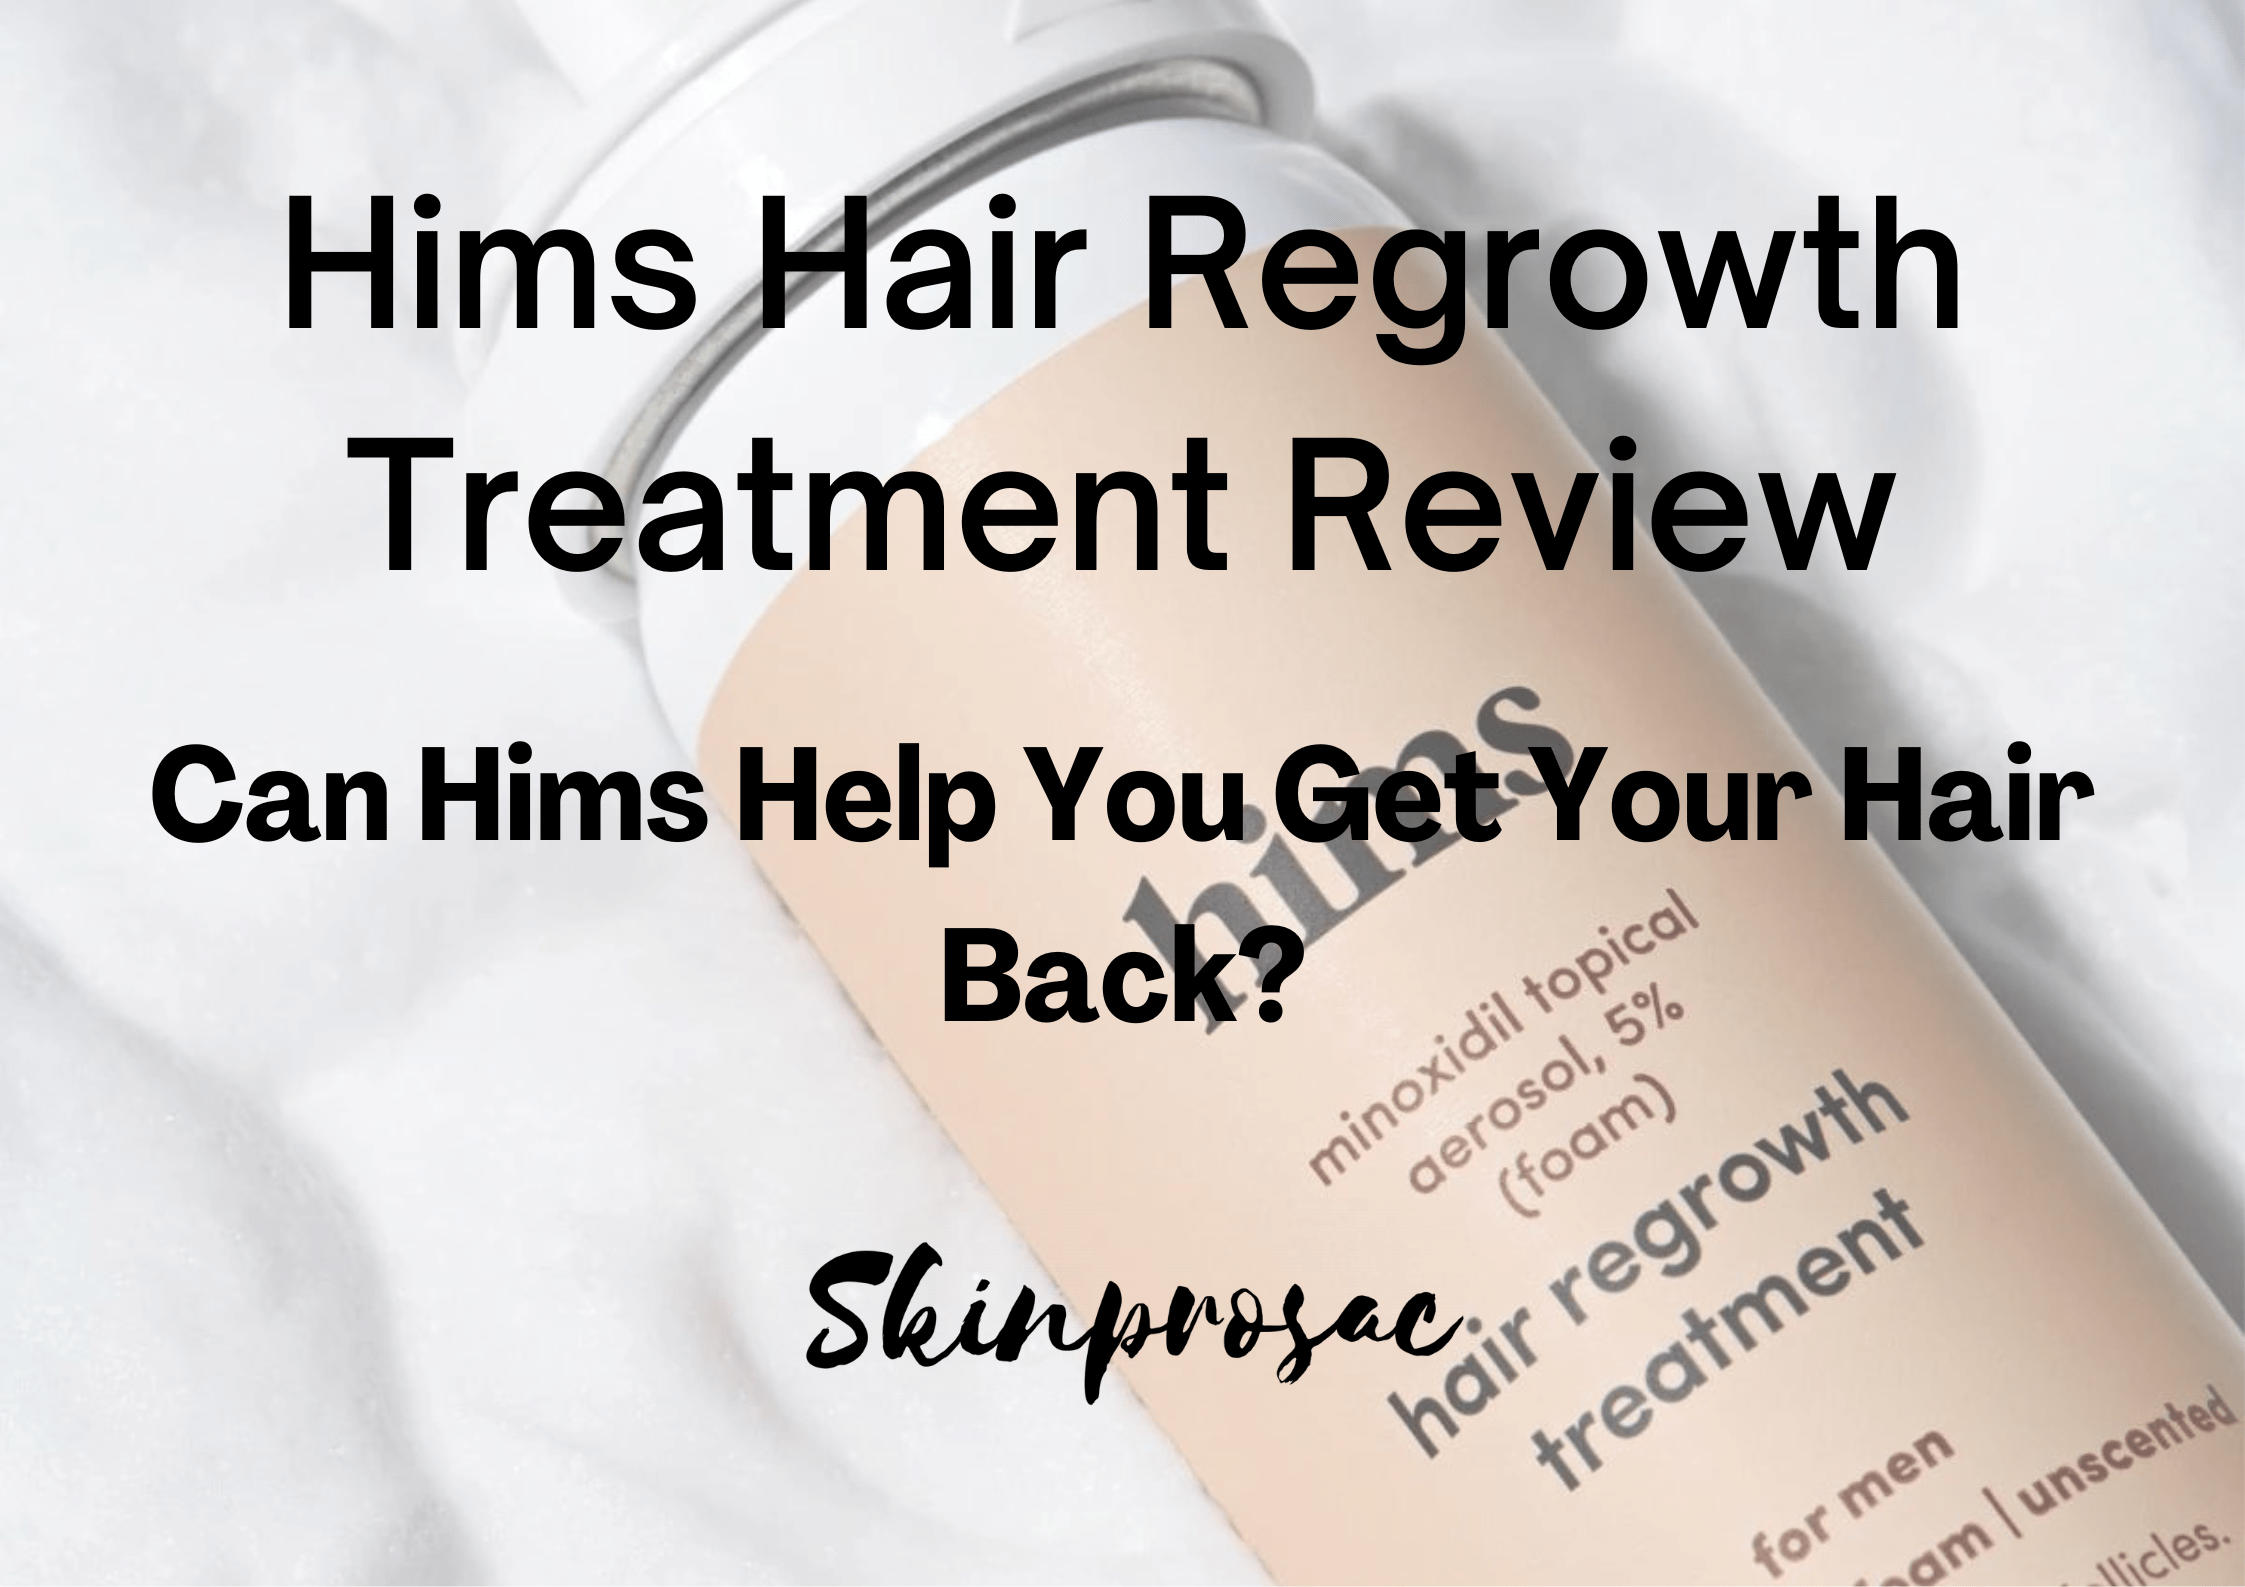 Hims Hair Regrowth Treatment Reviews | Does It Work?